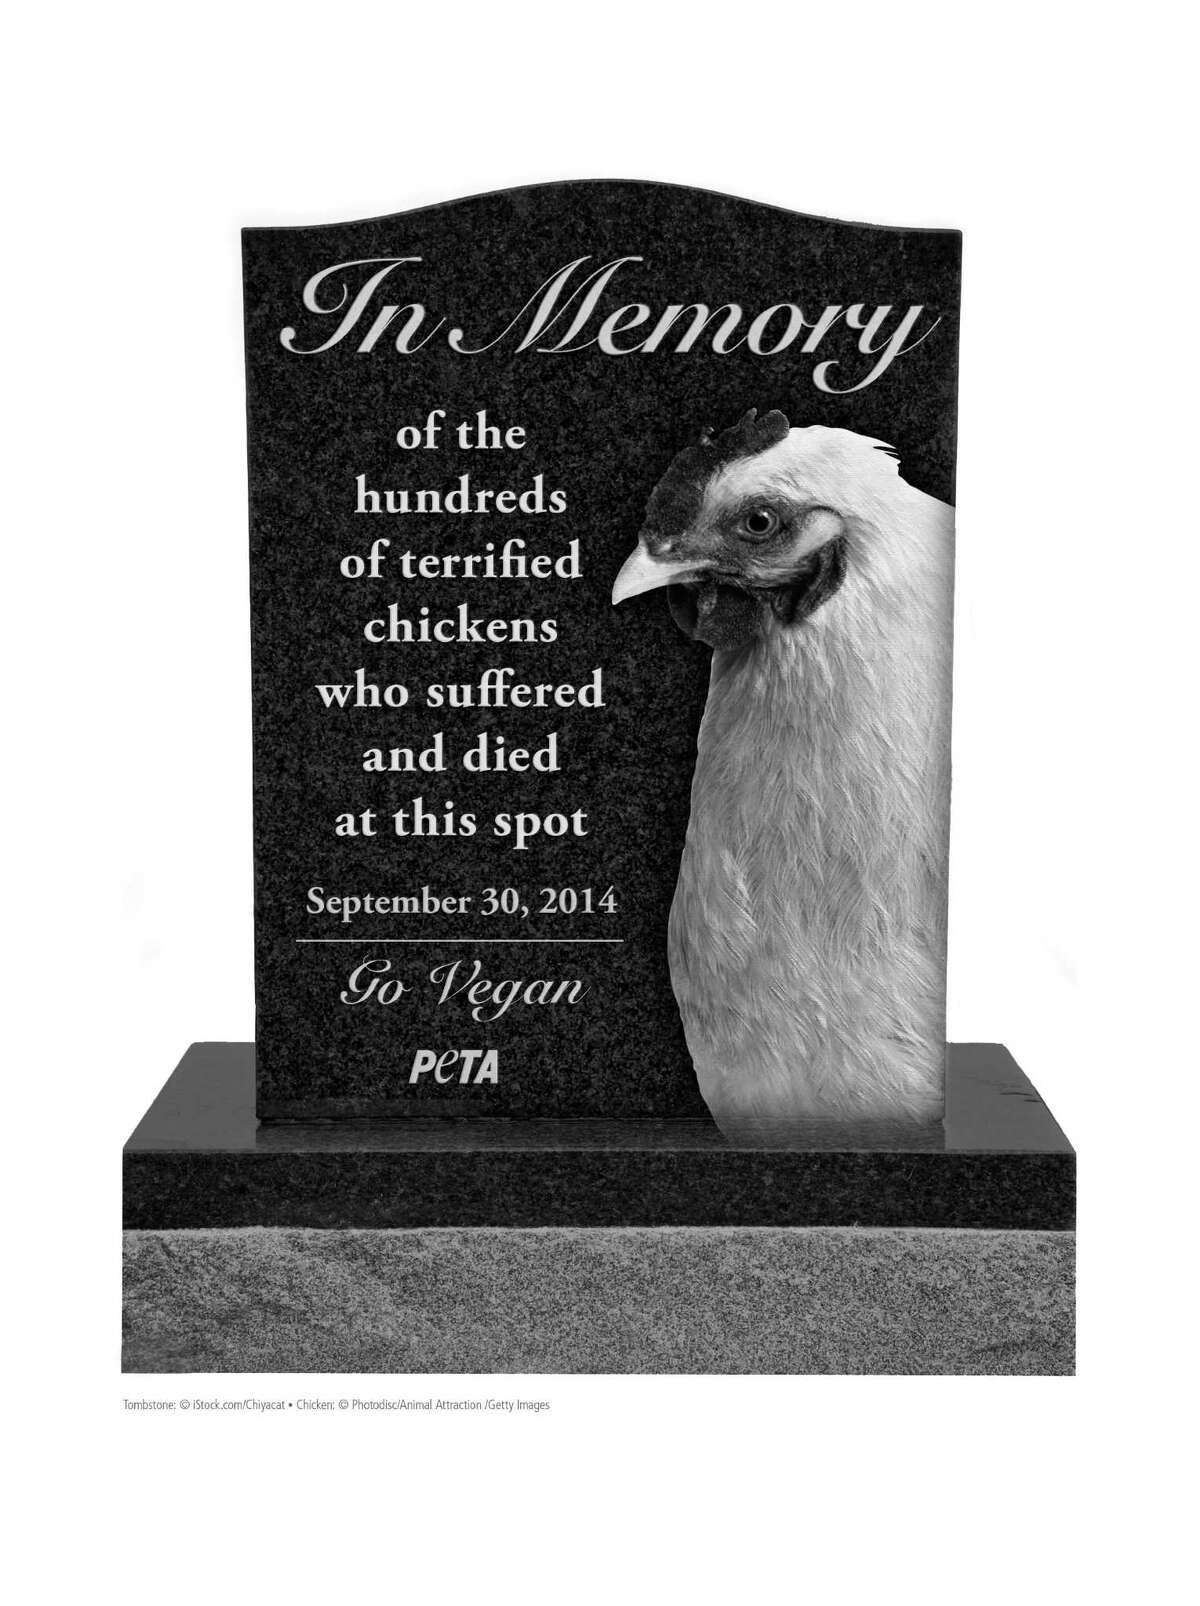 Animal rights group PETA have written to the Texas department of transport to request permission to install this 10 foot high tombstone at the spot where an 18-wheeler carrying chickens overturned on Sept 30 in Bryan, Texas.